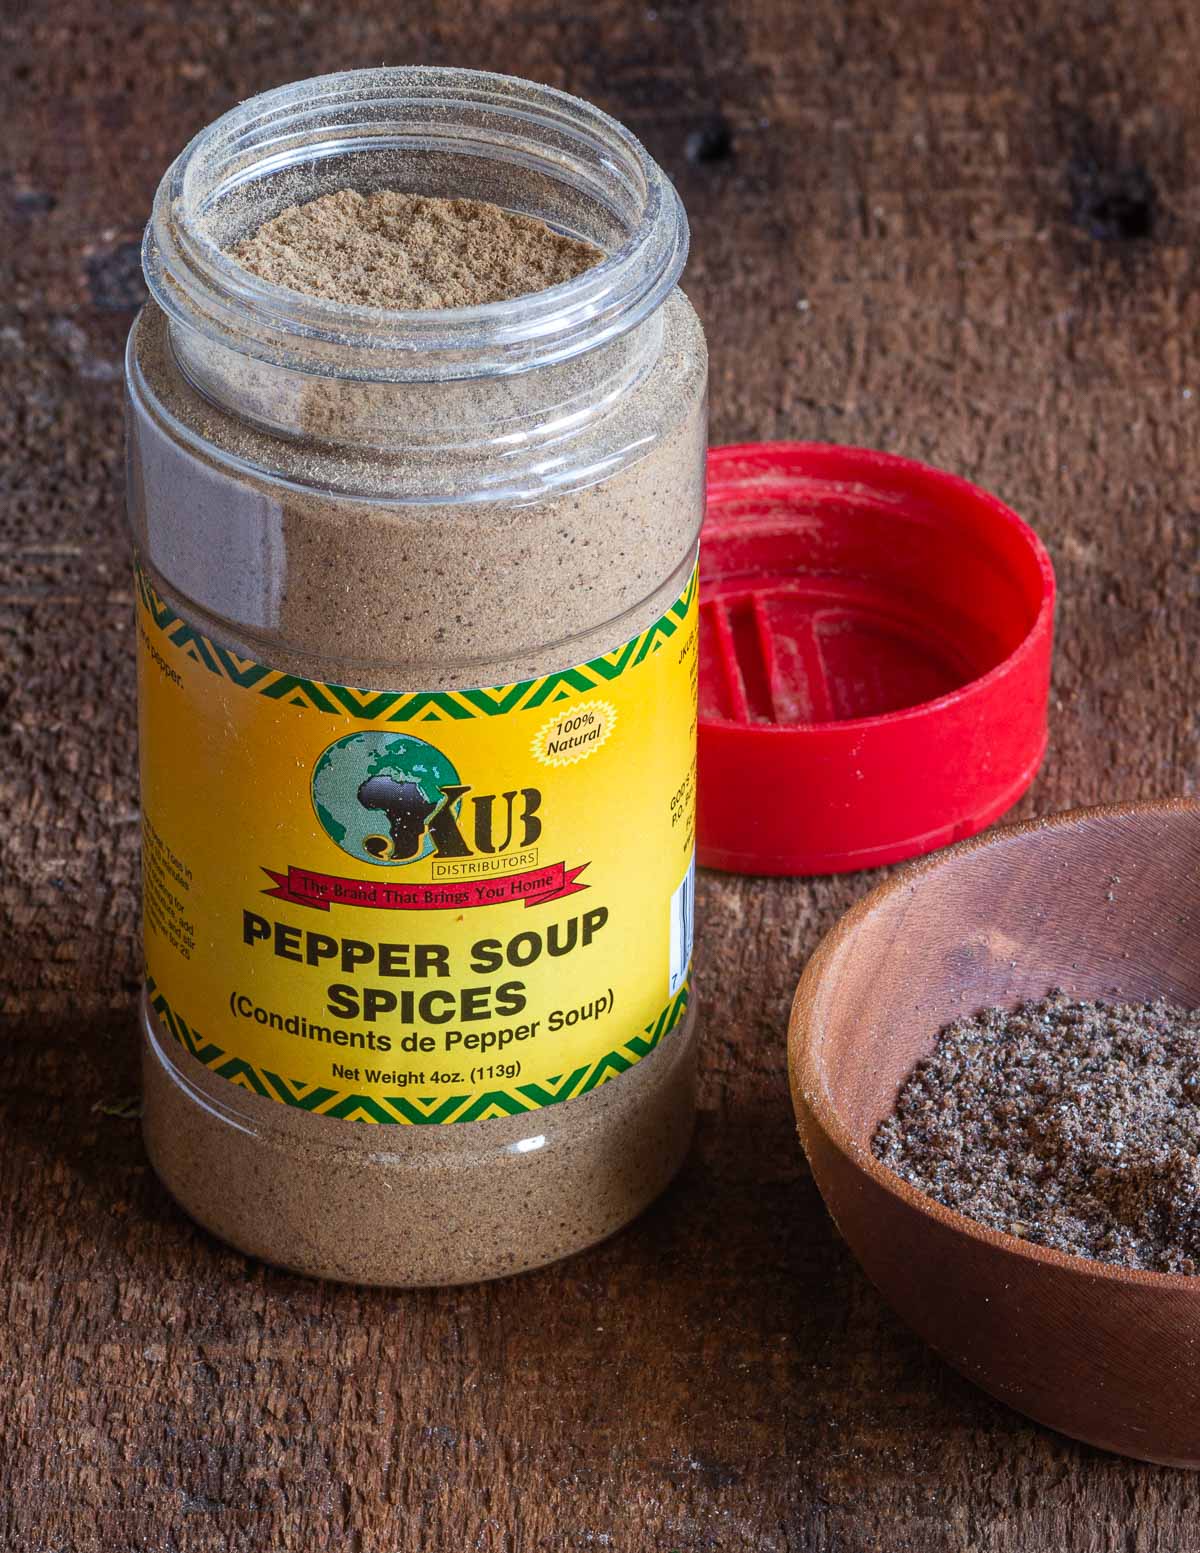 A jar of goat pepper soup spices from an African grocer.